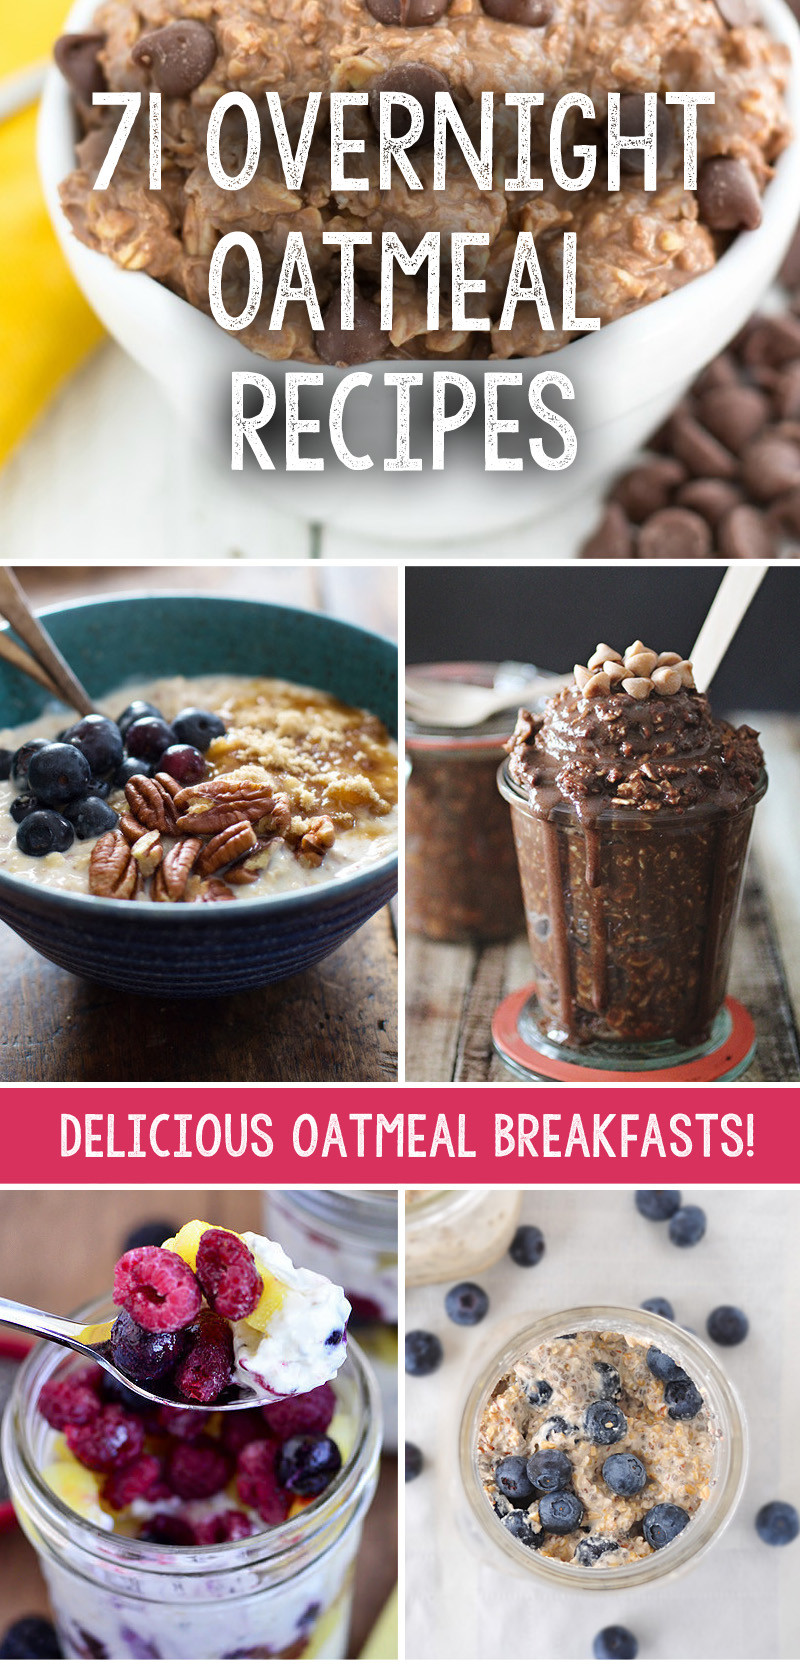 Oatmeal Recipes For Weight Loss
 We have collected 71 incredible overnight oatmeal recipes